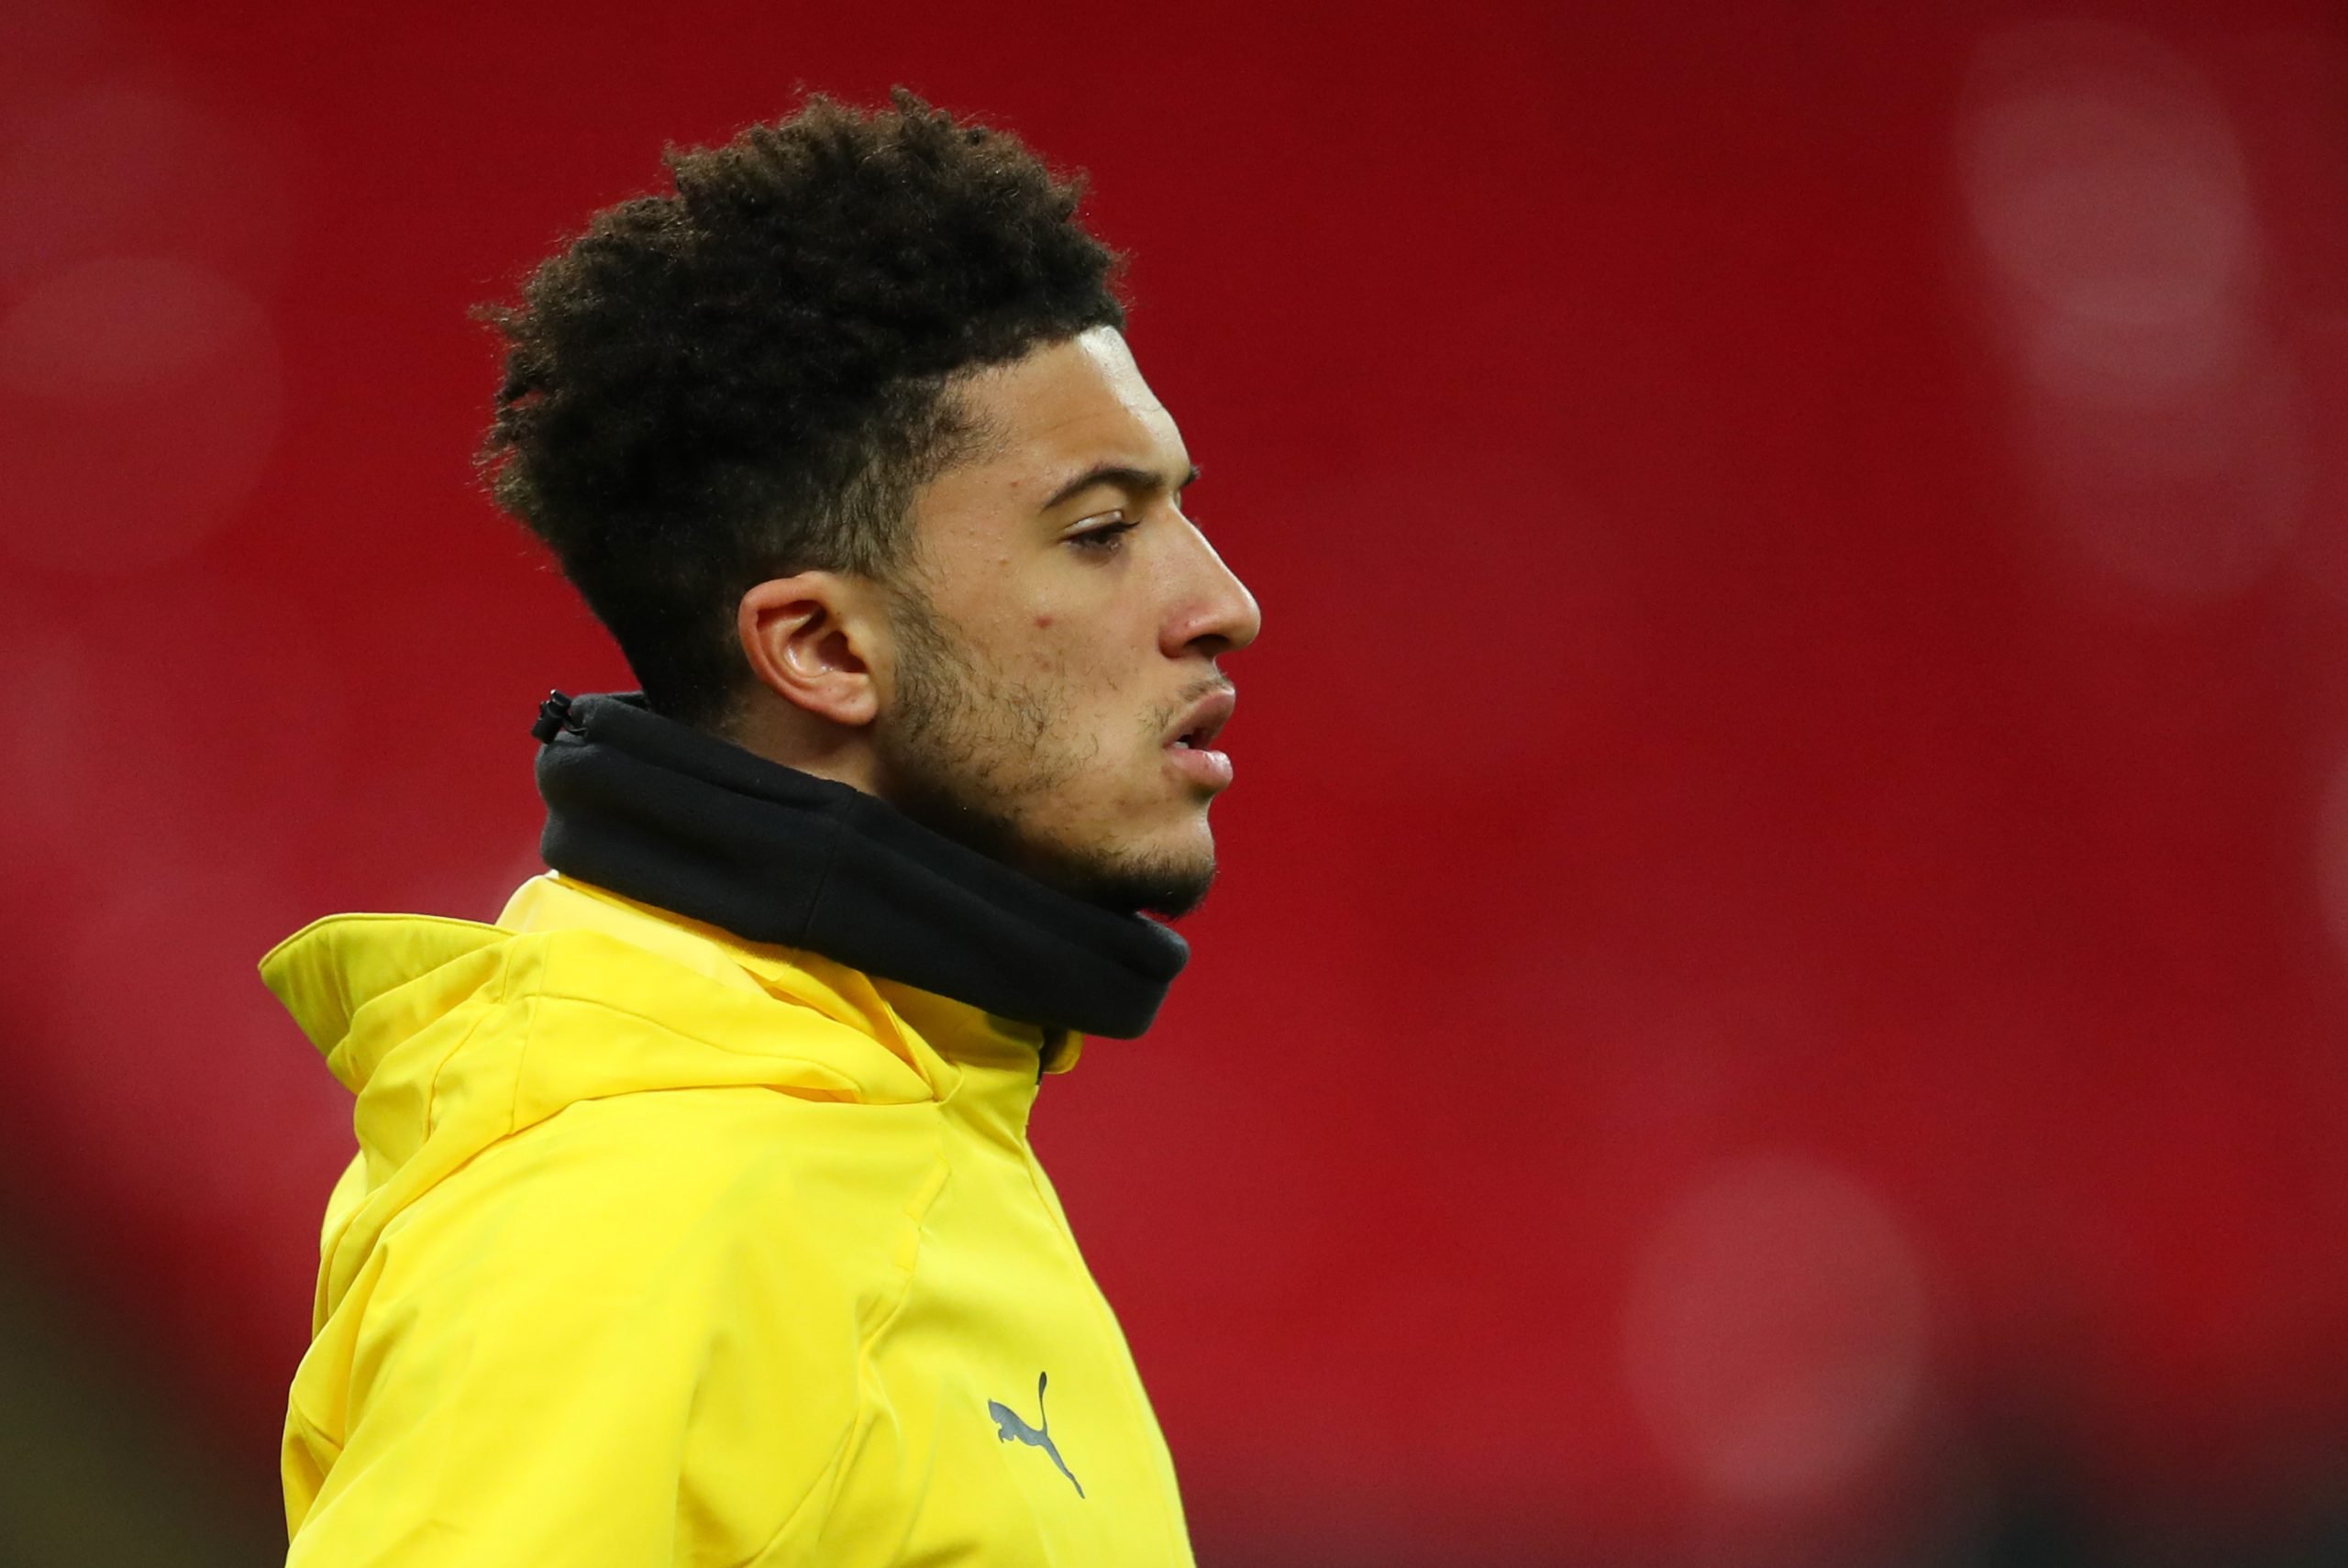 Can Borussia Dortmund afford to sell Jadon Sancho this summer - Manchester United are knocking on the door.